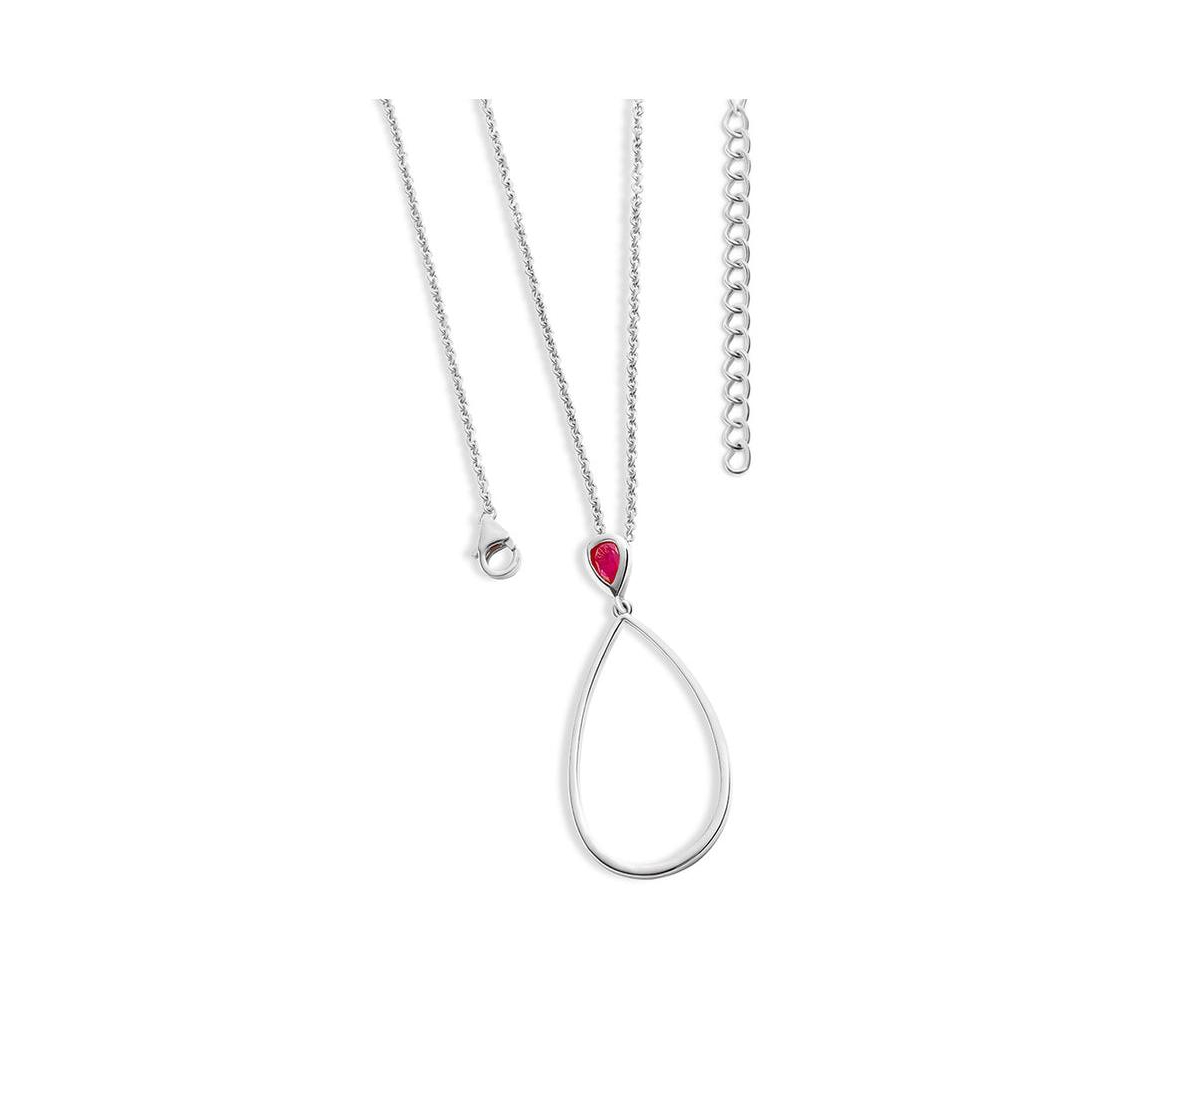 Long Petal Drop Necklace with Pear Cut Ruby - Silver